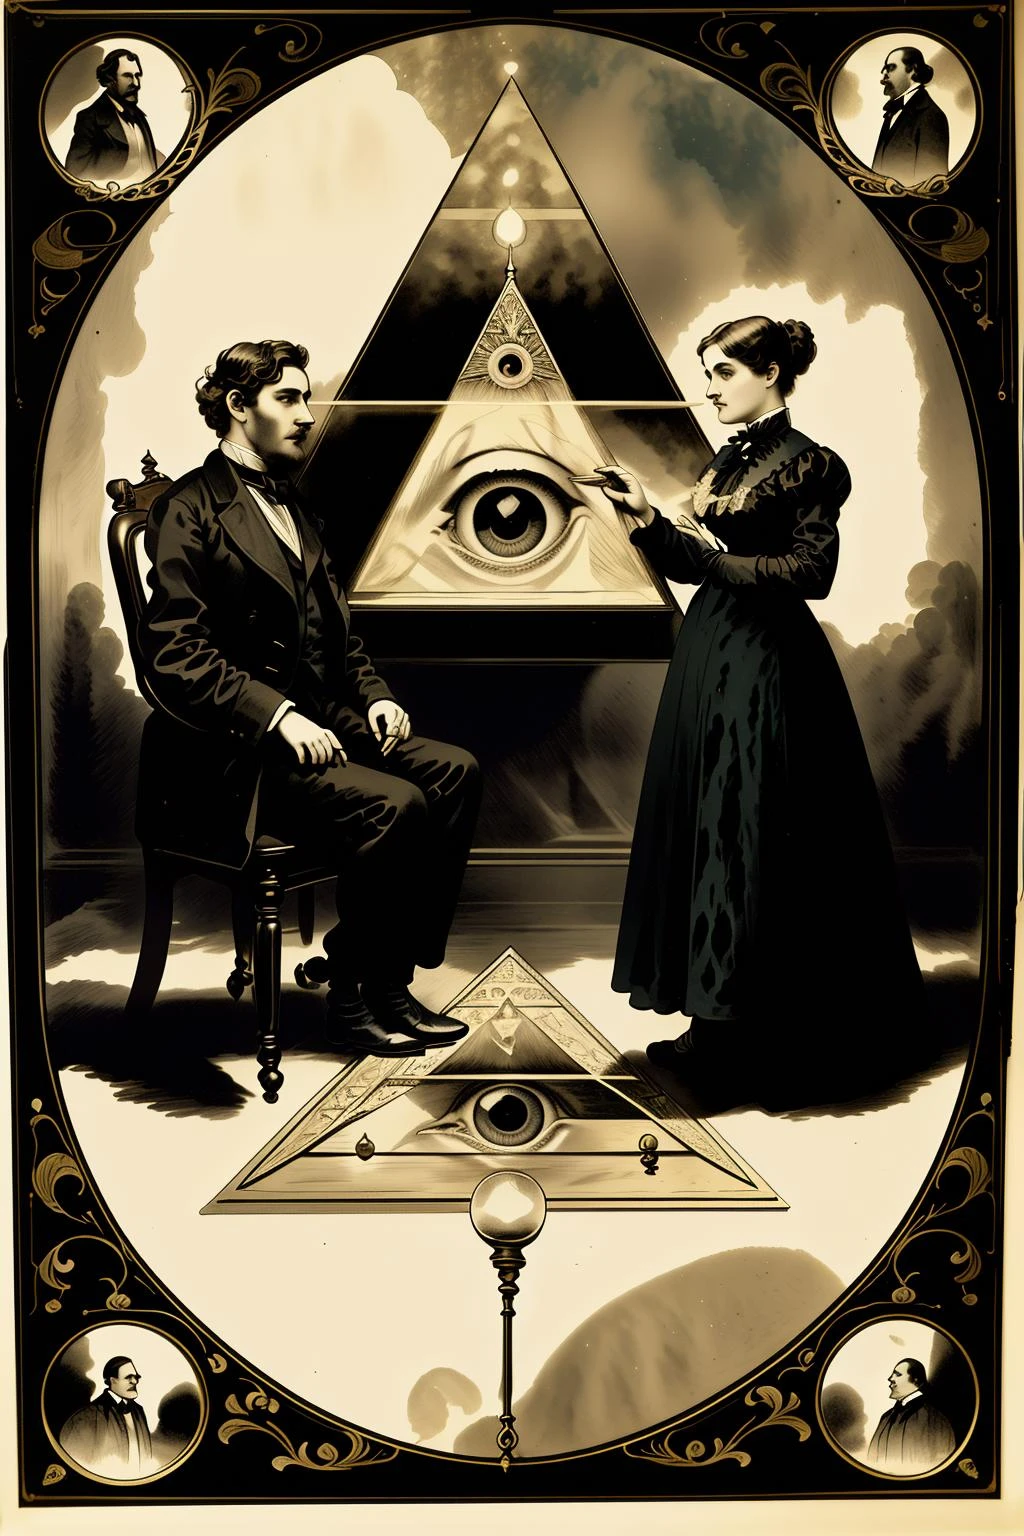 a victorien  poster advertising a  a painting of two people sitting on a rug in front of a pyramid with an eye in the center of the image and a third person standing on the floor , 1800, Charles McAuley, situé en 1860, une sérigraphie, école américaine de barbizon,  victorien_ésotérique , (( victorien style graphic ))